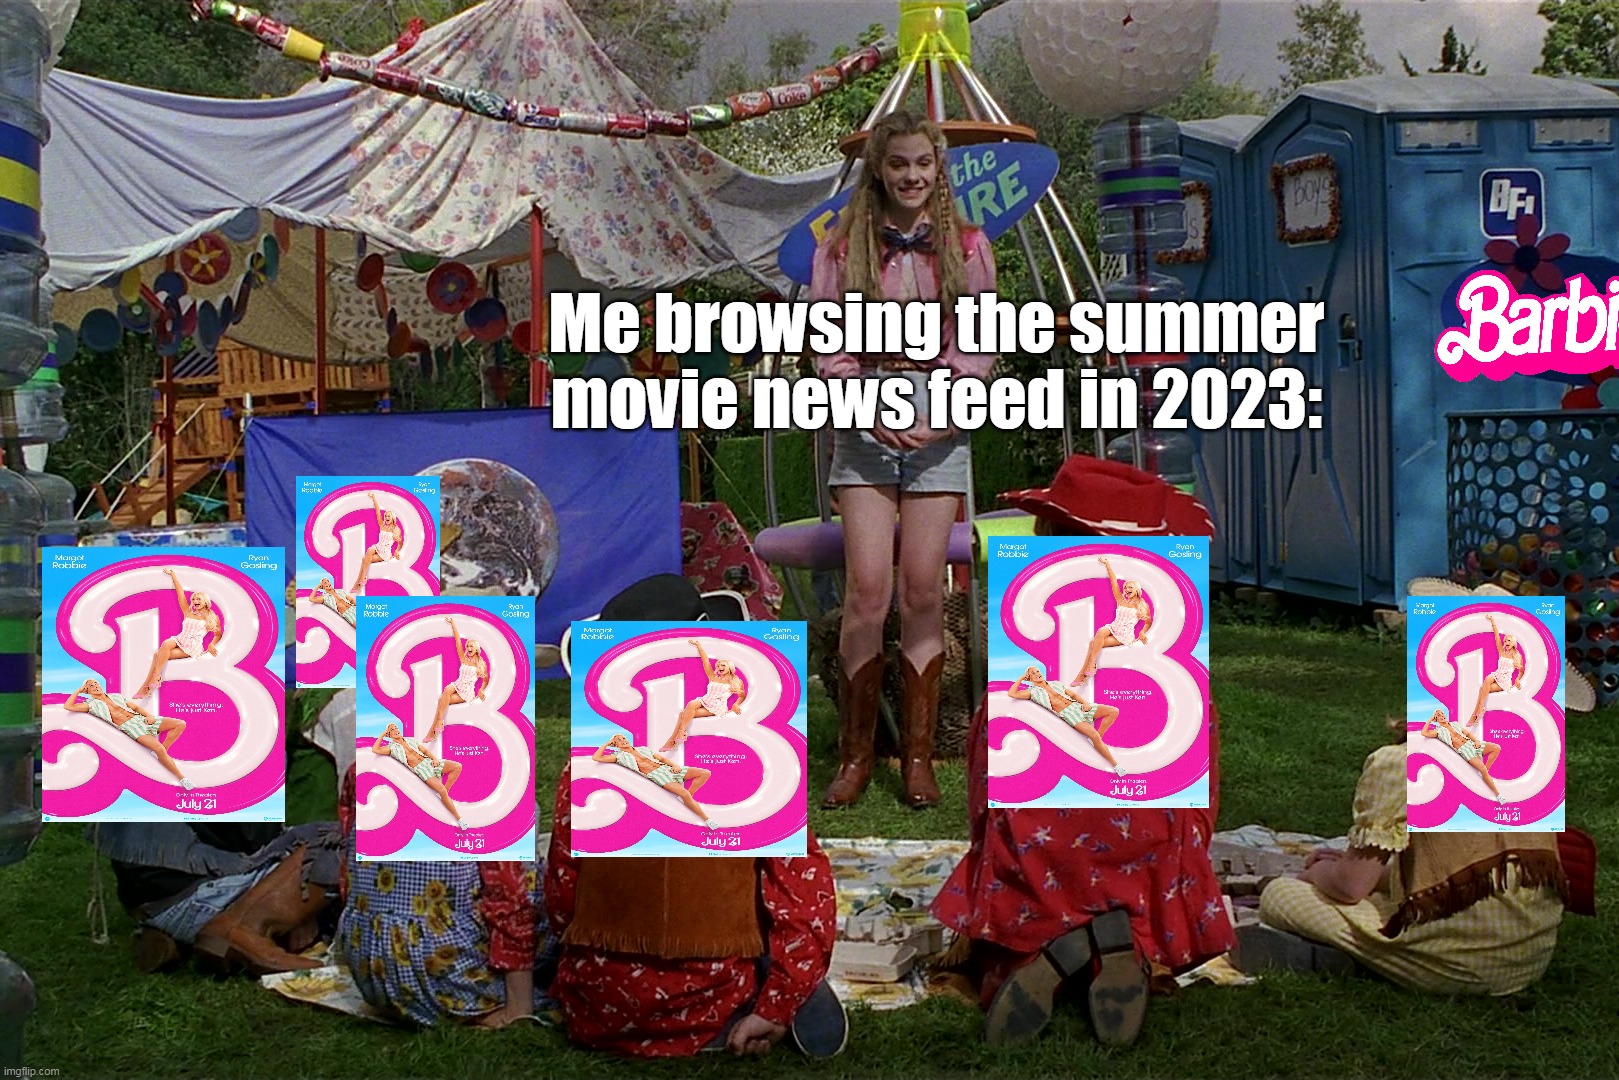 Me browsing the summer movie news feed in 2023: | image tagged in meme,memes,funny,barbie,barbie movie,barbiemania | made w/ Imgflip meme maker